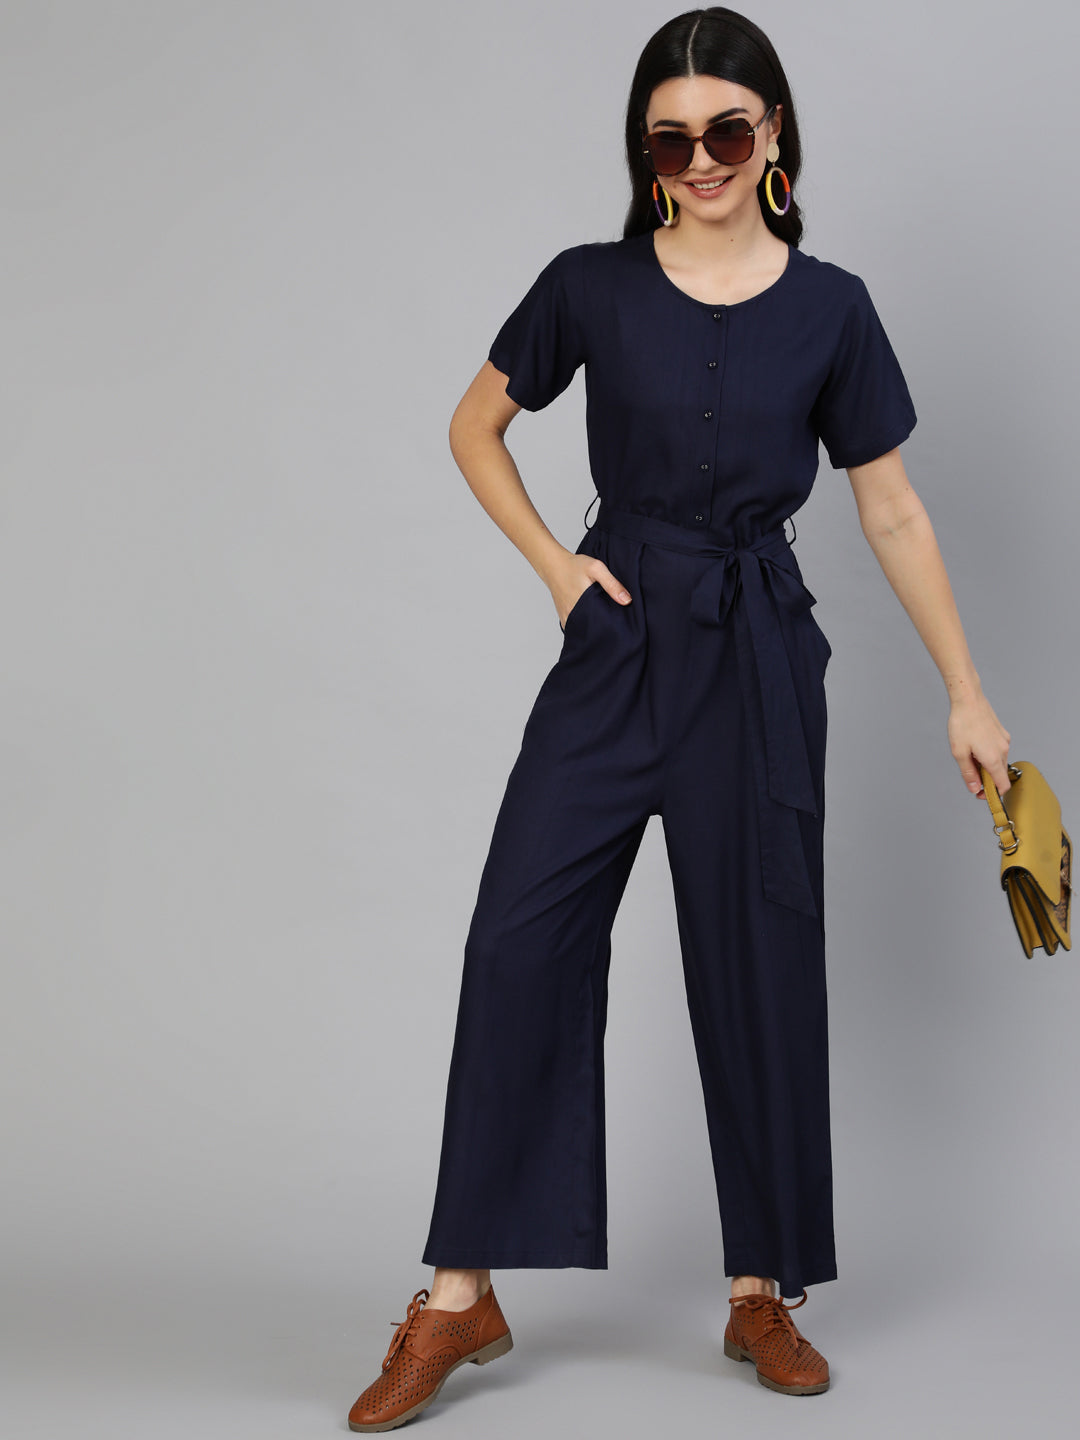 Women's Navy Blue Jumpsuit With Side Pockets - Nayo Clothing